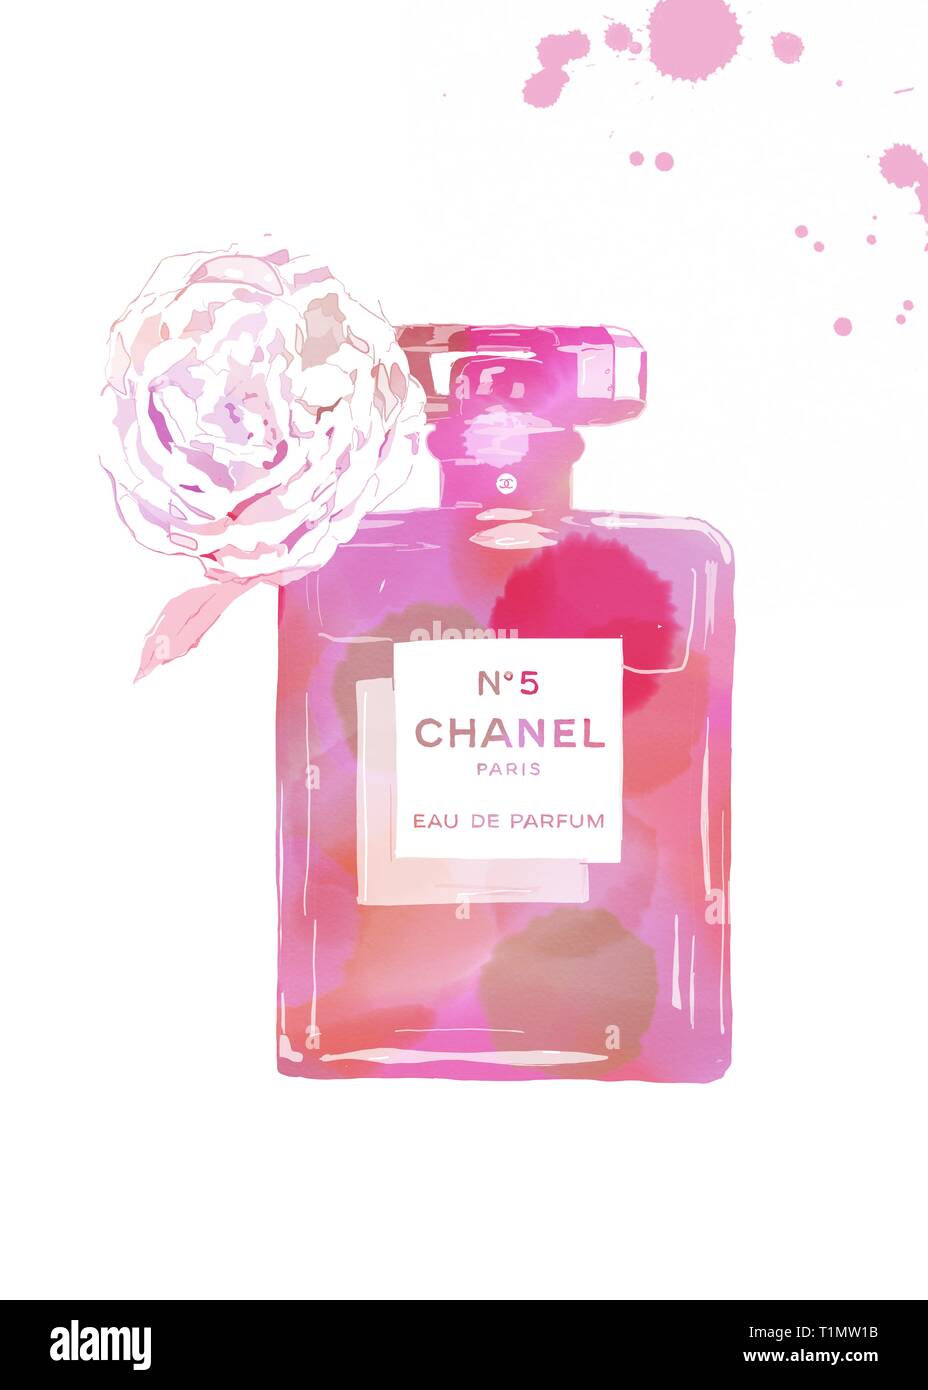 NTWRK - CHANEL WITH NEON PINK OVERSPRAY